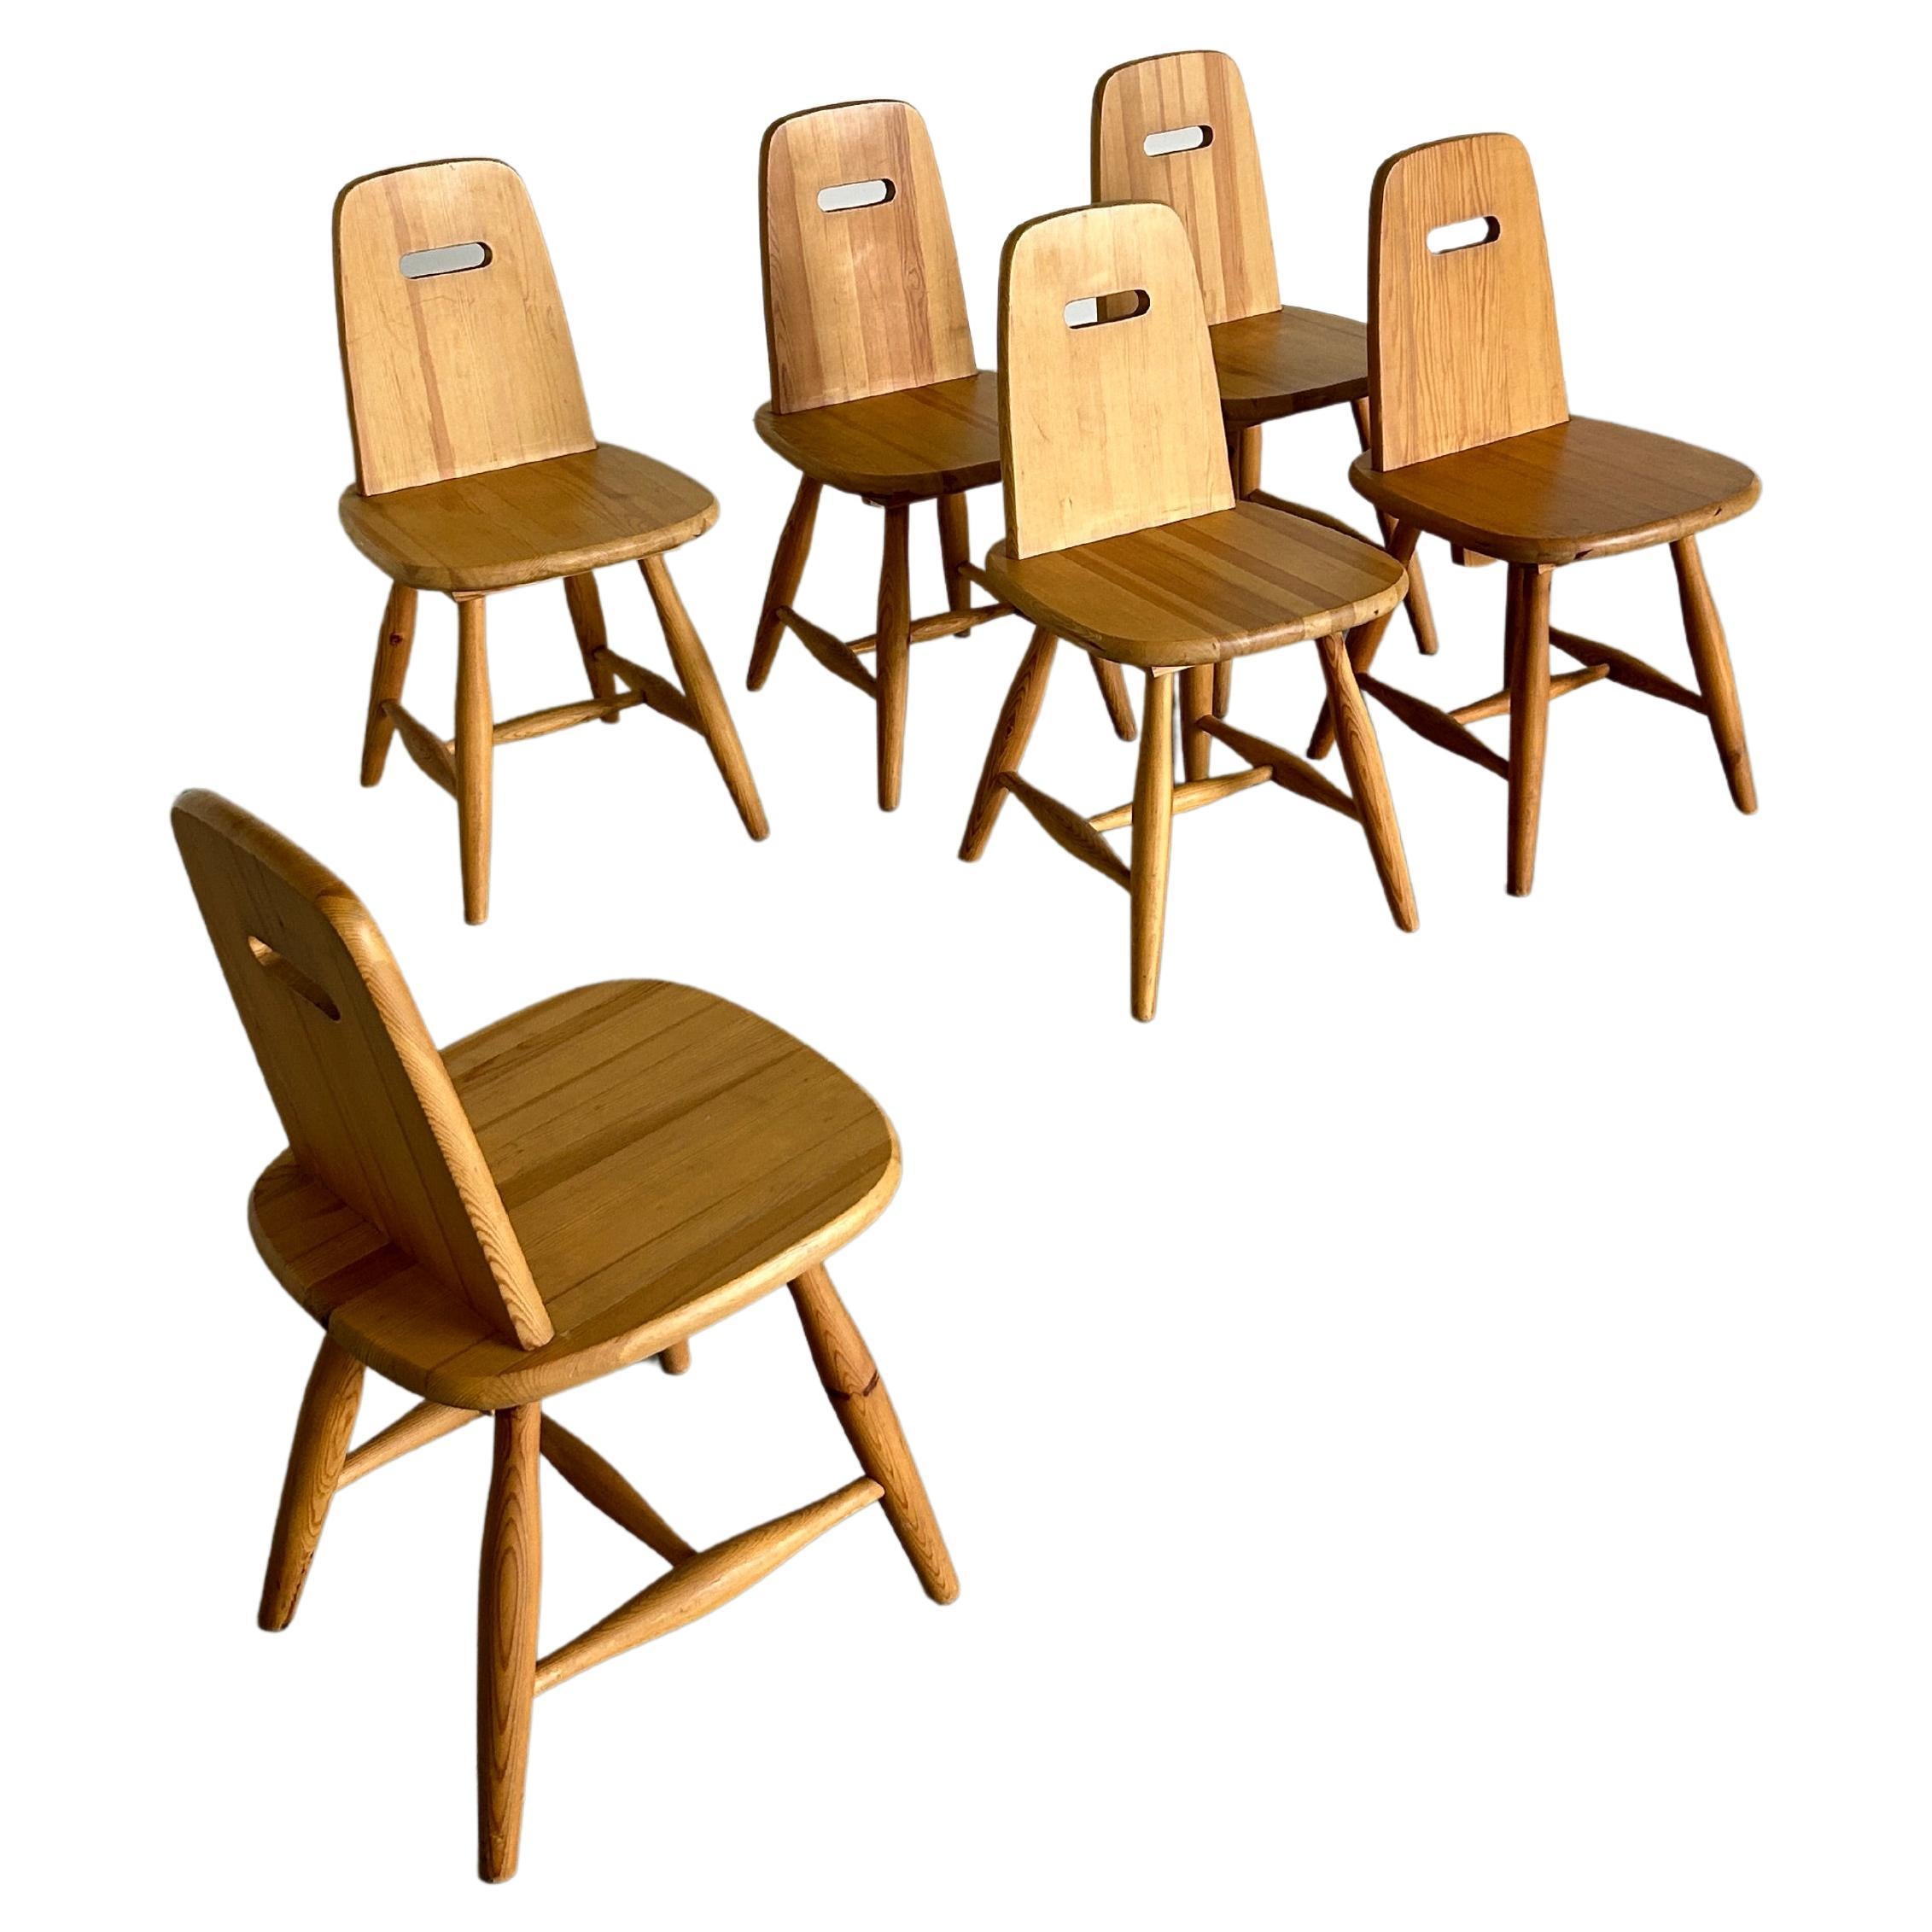 Set of 6 Eero Aarnio 'Pirtti' Wooden Dining Chairs in Solid Pine for Laukaan Puu